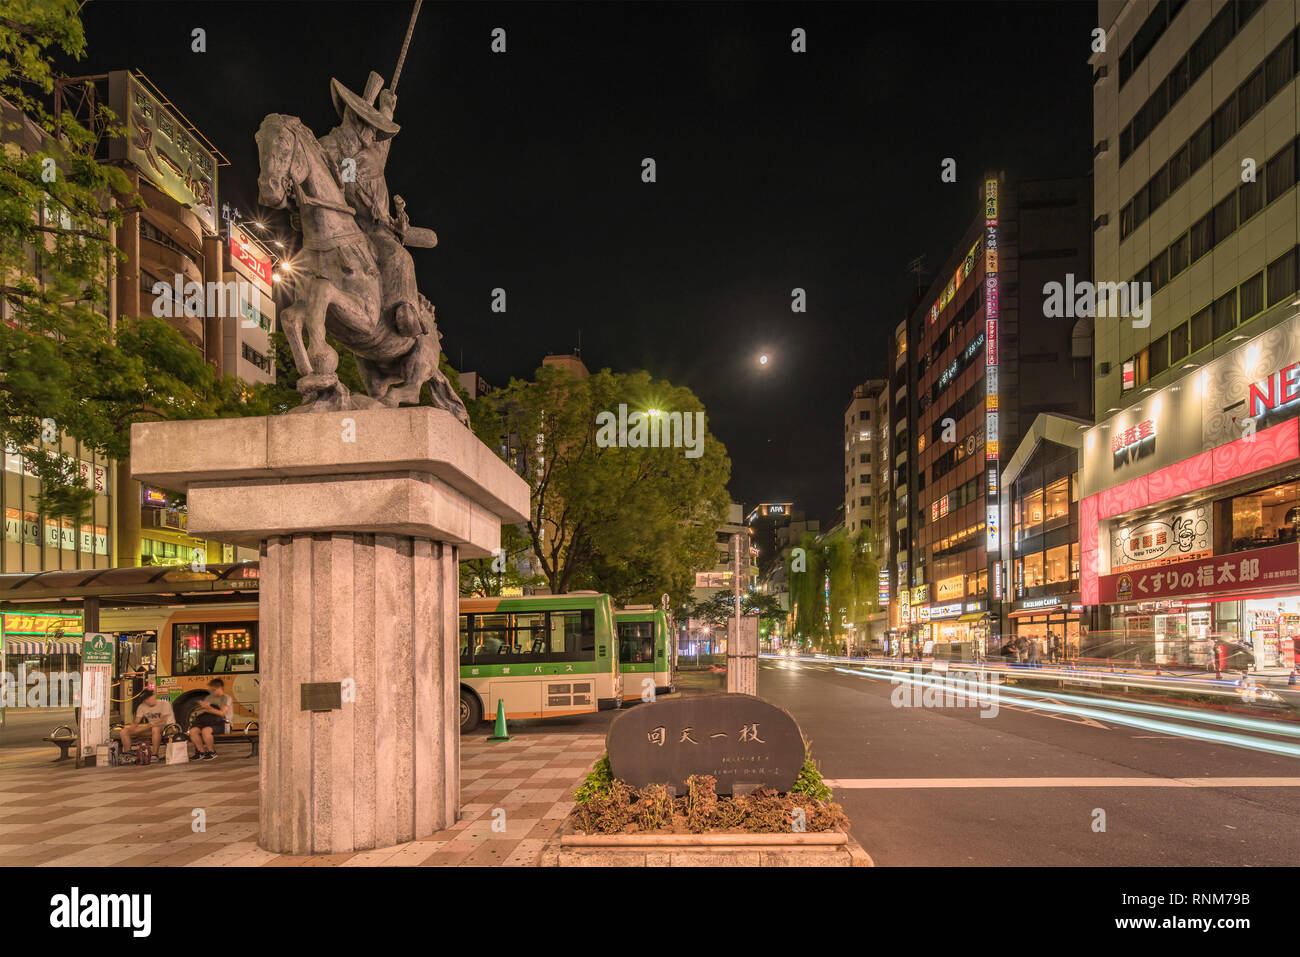 Night view of the square in front of the Nippori train station in the Arakawa district of Tokyo with a statue of a horse ridden by Ota Dokan who was a Stock Photo